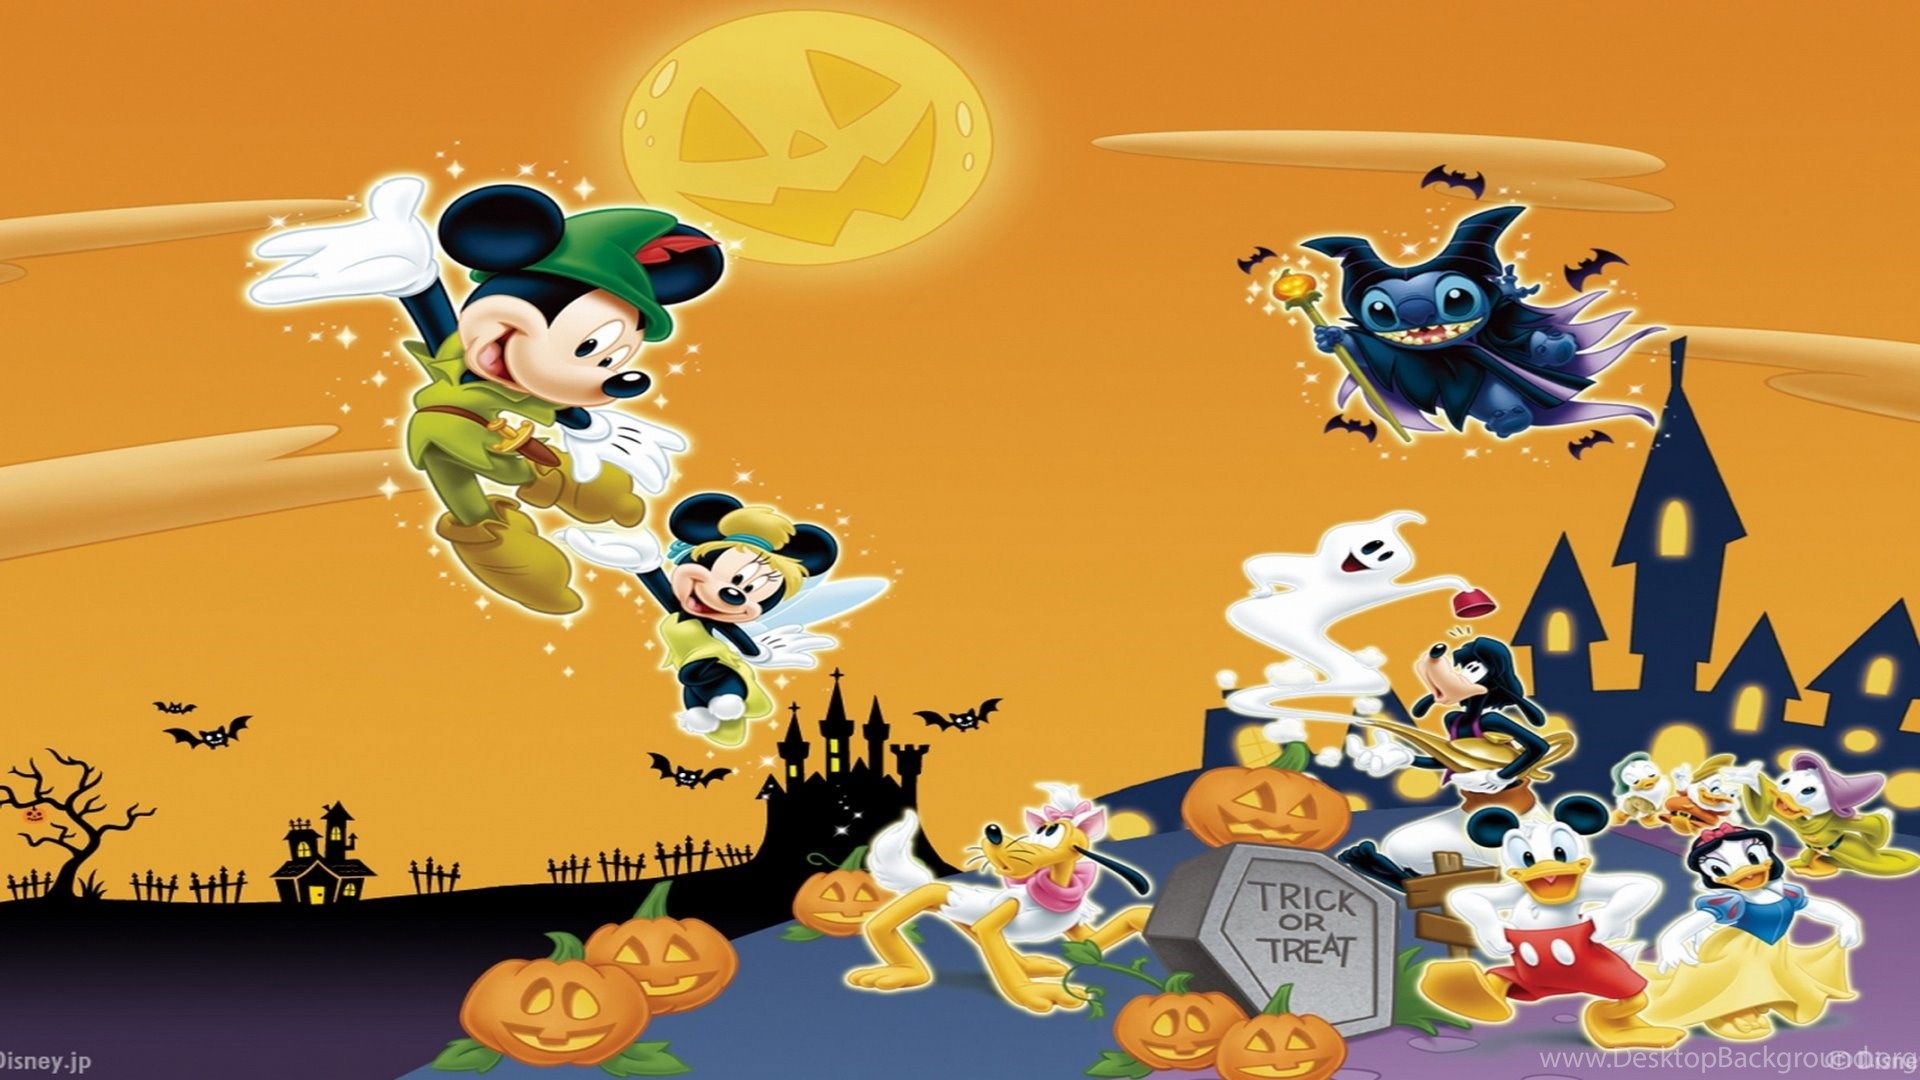 Mickey Mouse Halloween, Land, 1920x1080 HD Wallpaper And FREE